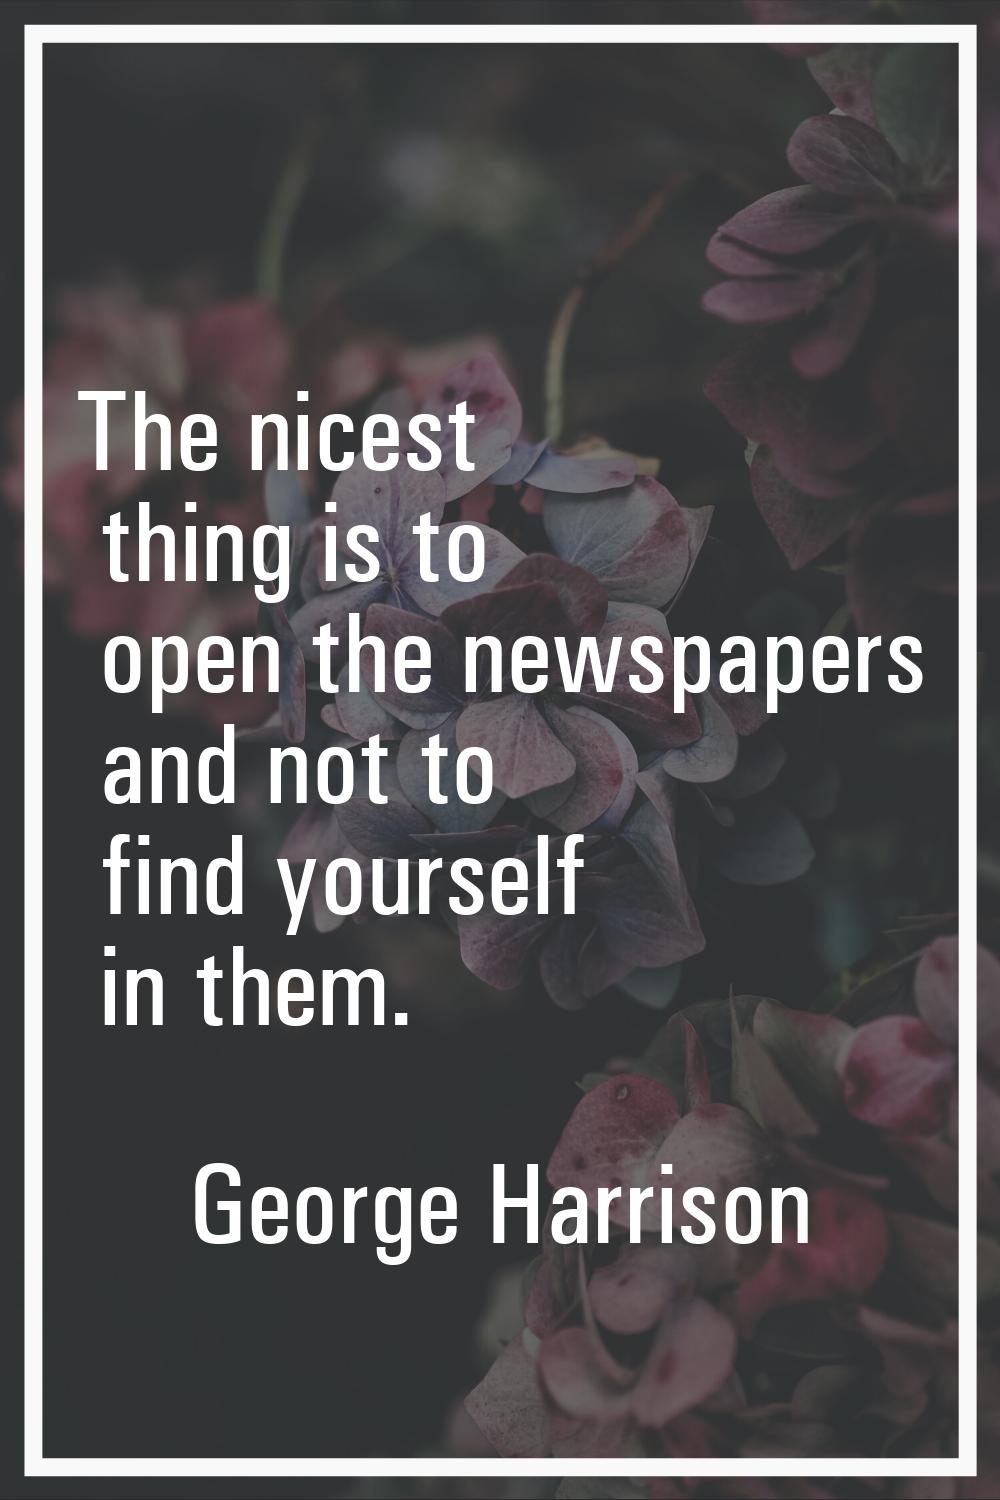 The nicest thing is to open the newspapers and not to find yourself in them.